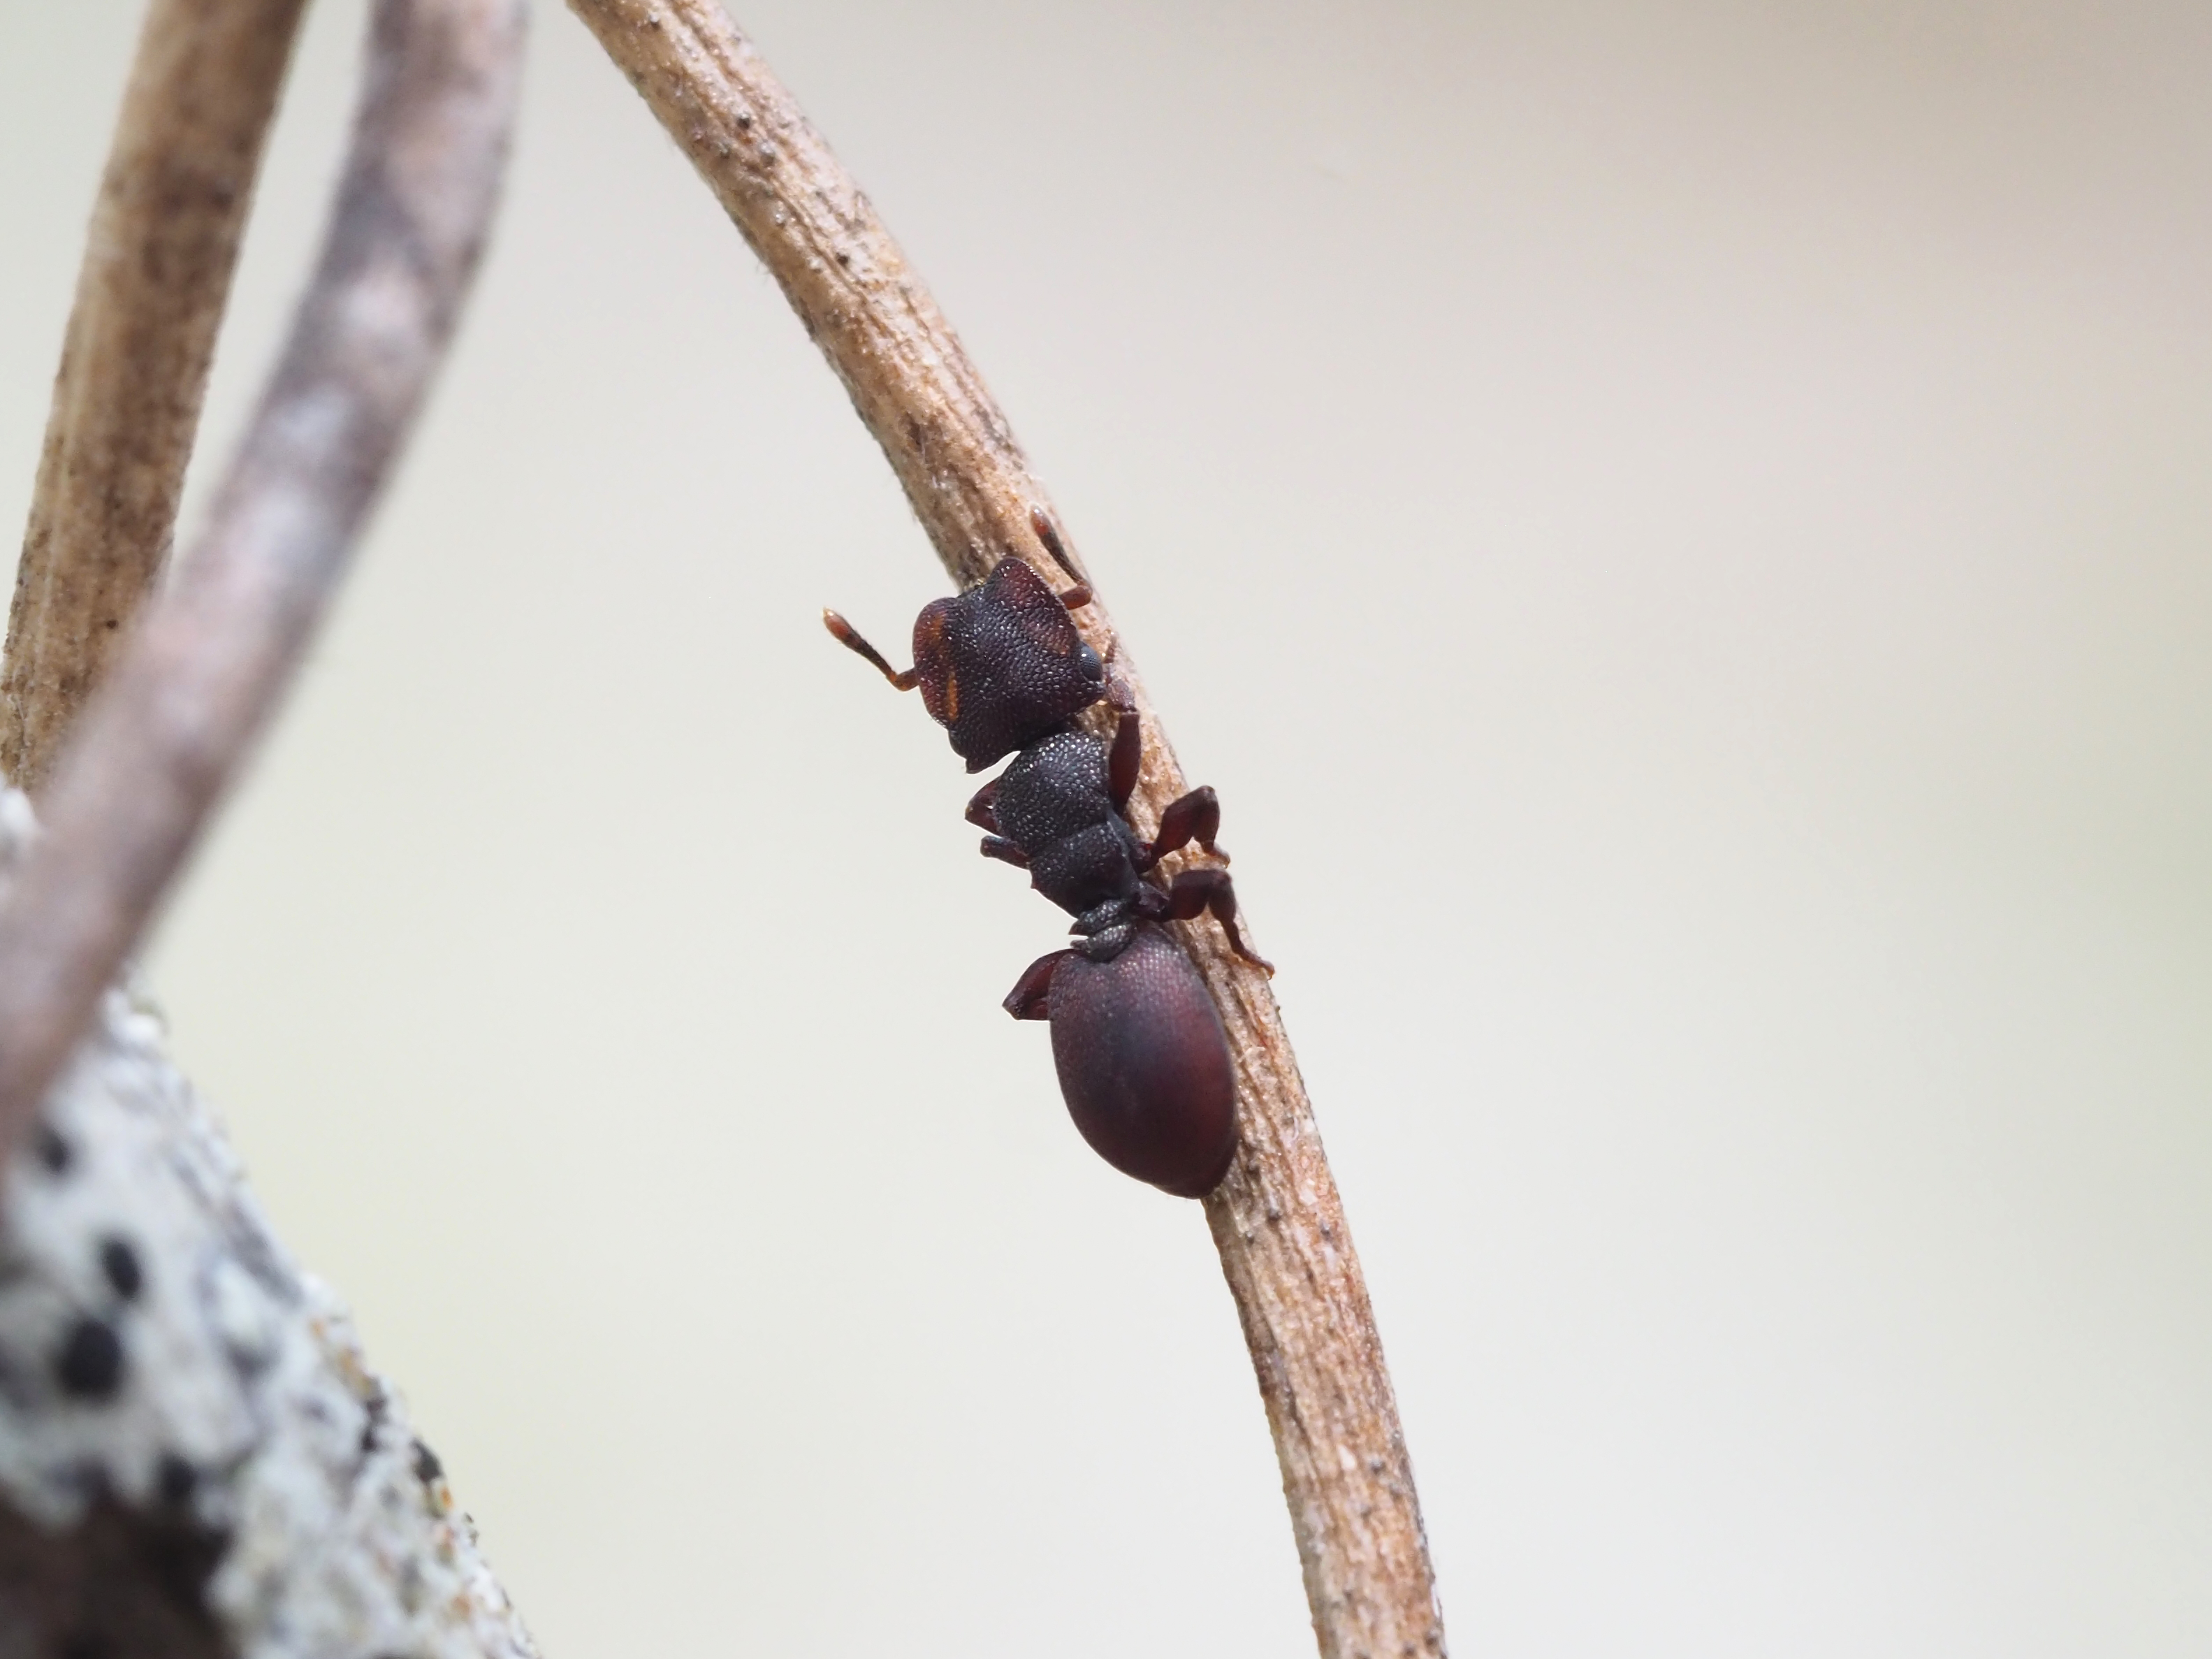 Turtle Ant Worker Moving Between Nests